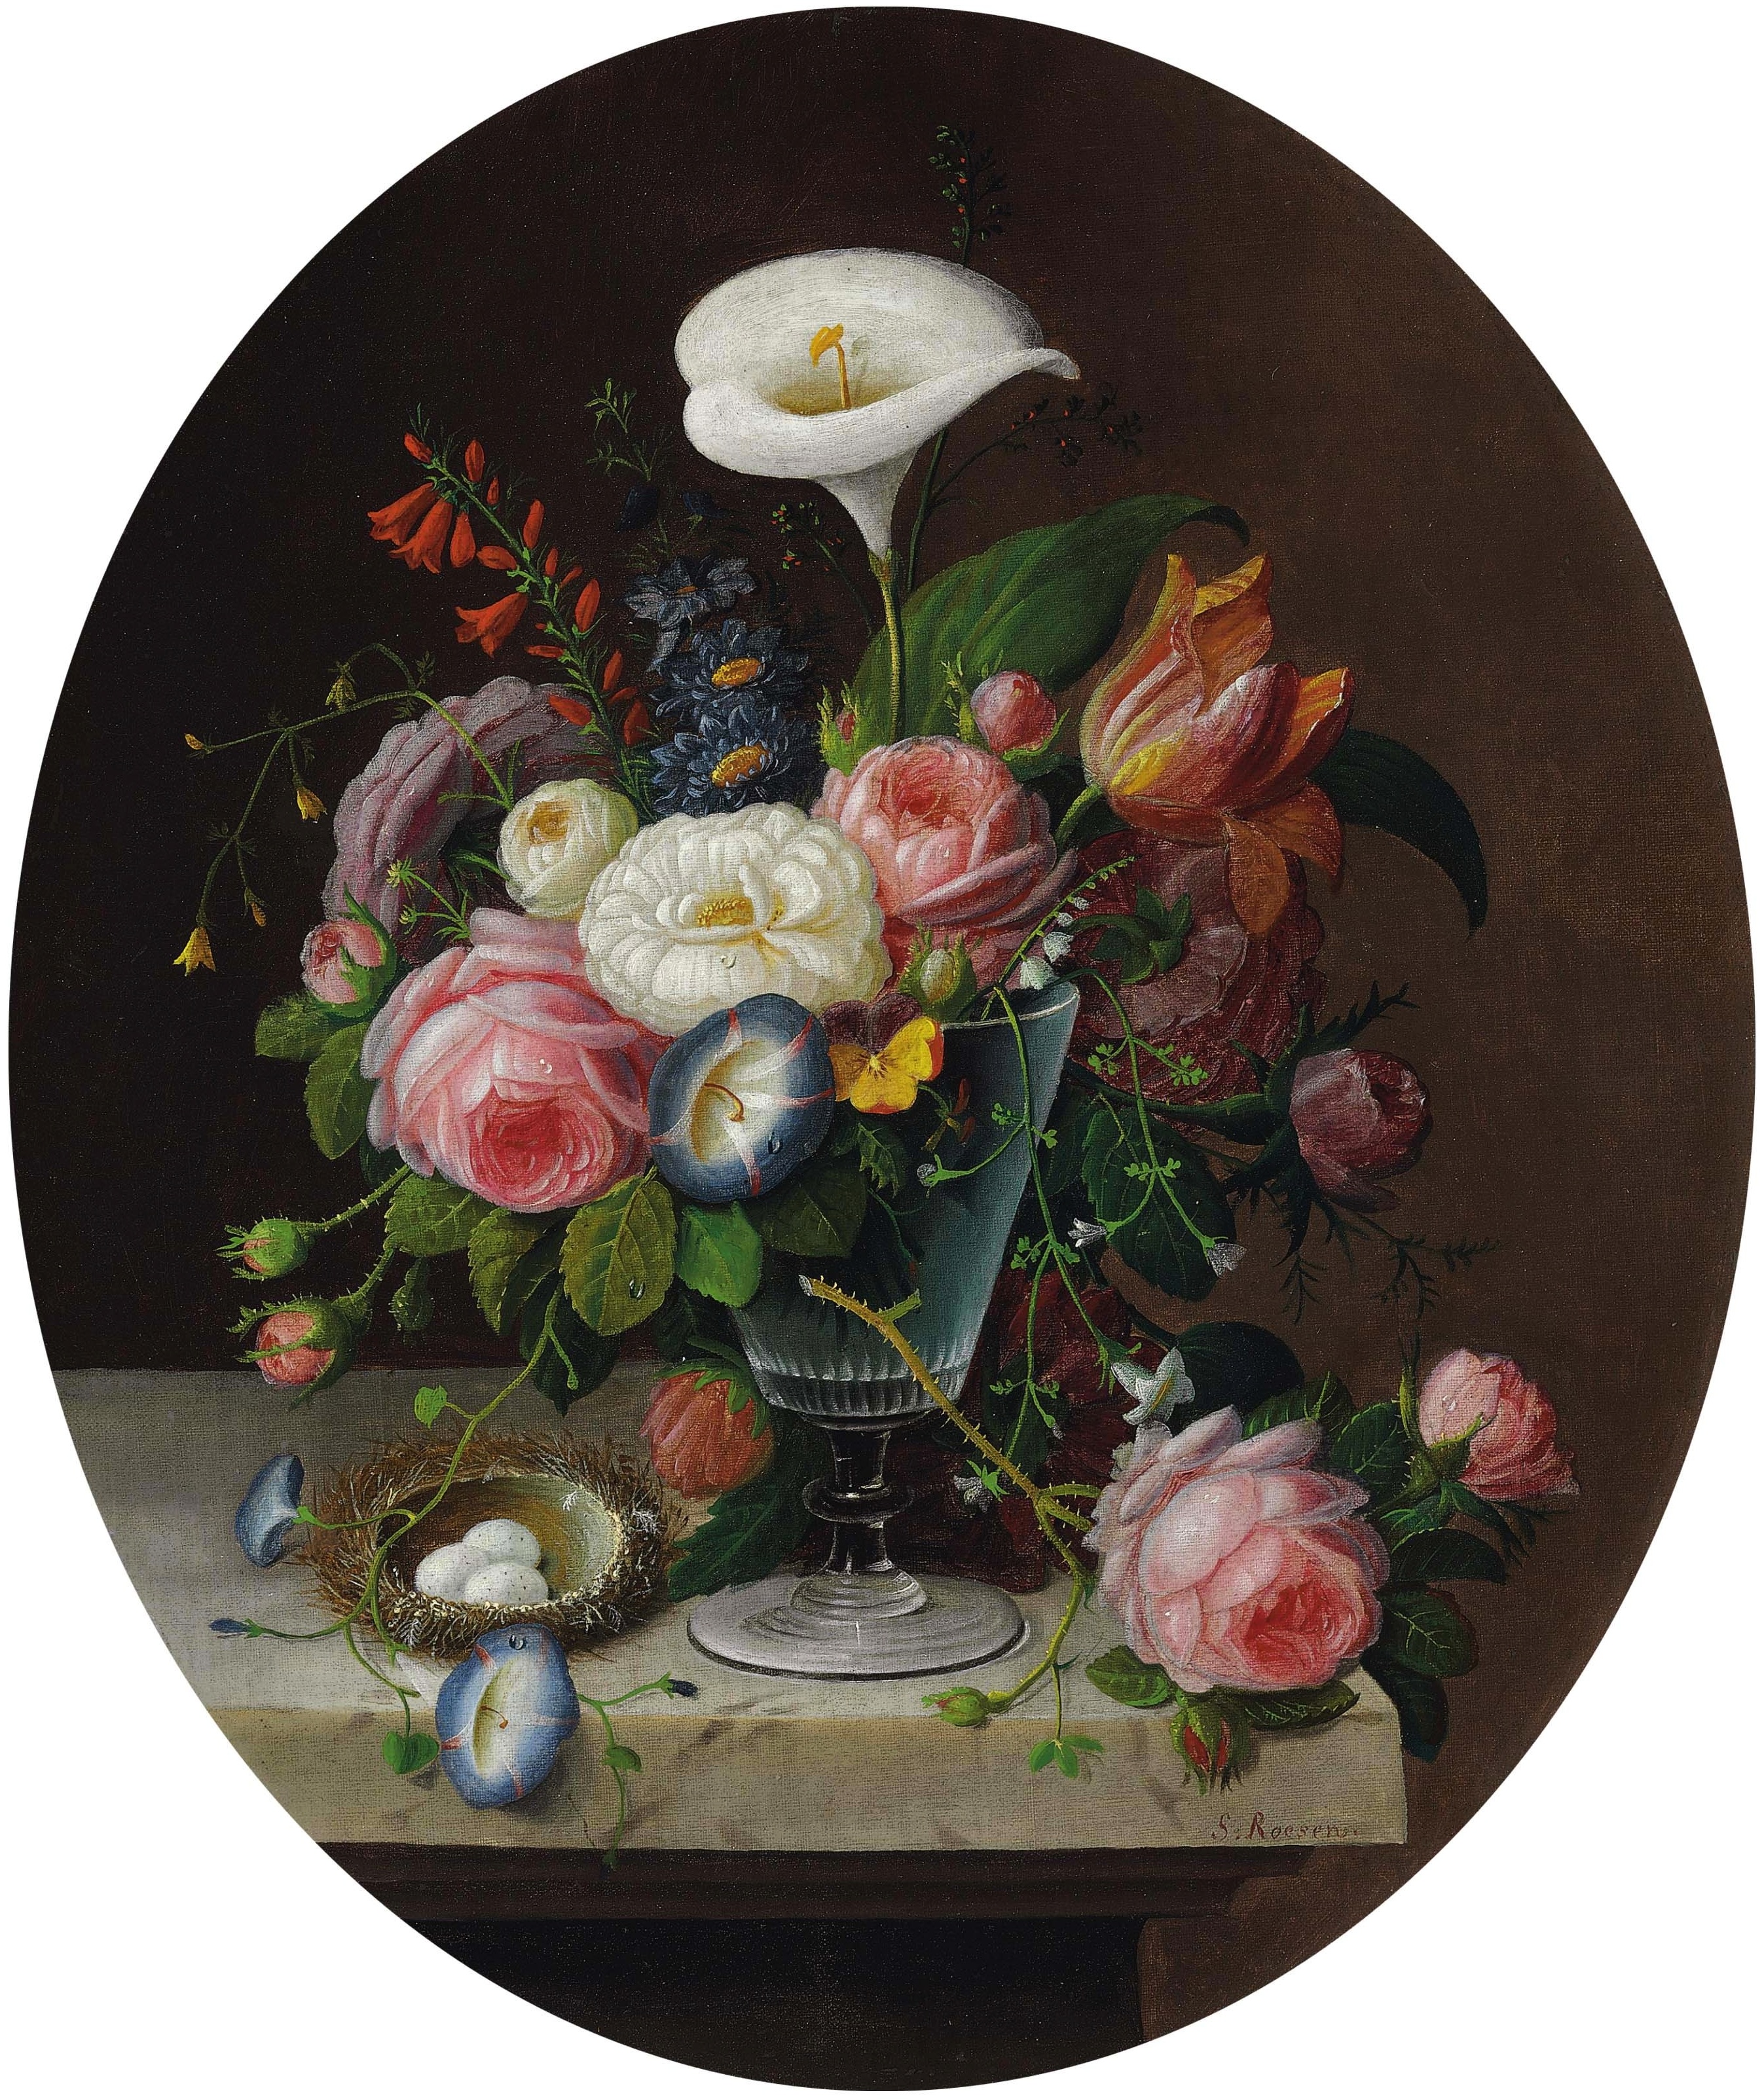 Severin Roesen - Flowers in a Crystal Vase